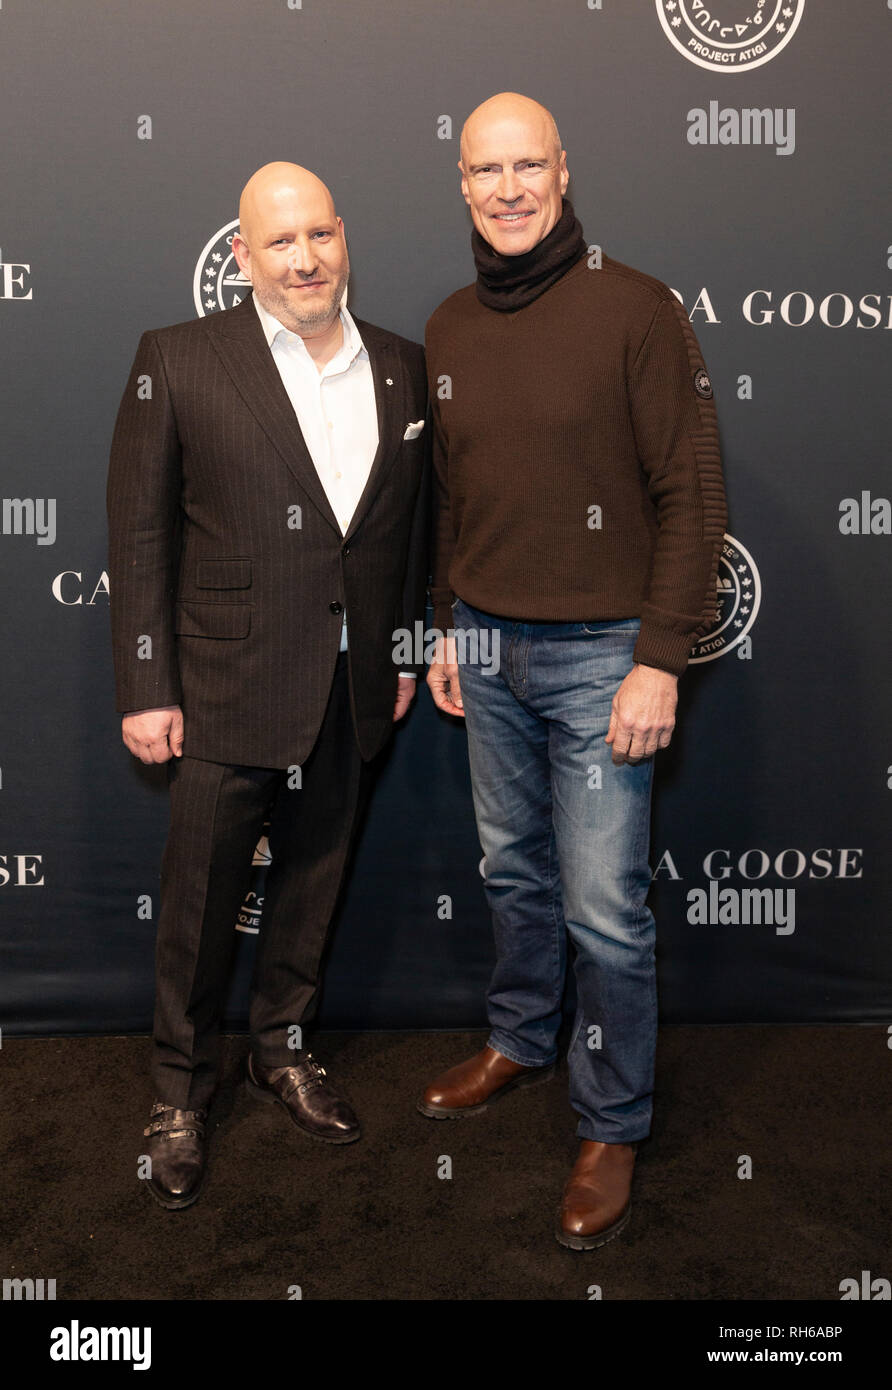 New York, NY - January 31, 2019: Dani Reiss and Mark MEssier attend Canada Goose Celebrates the Launch of Project Atigi at Studio 525 Credit: lev radin/Alamy Live News Stock Photo